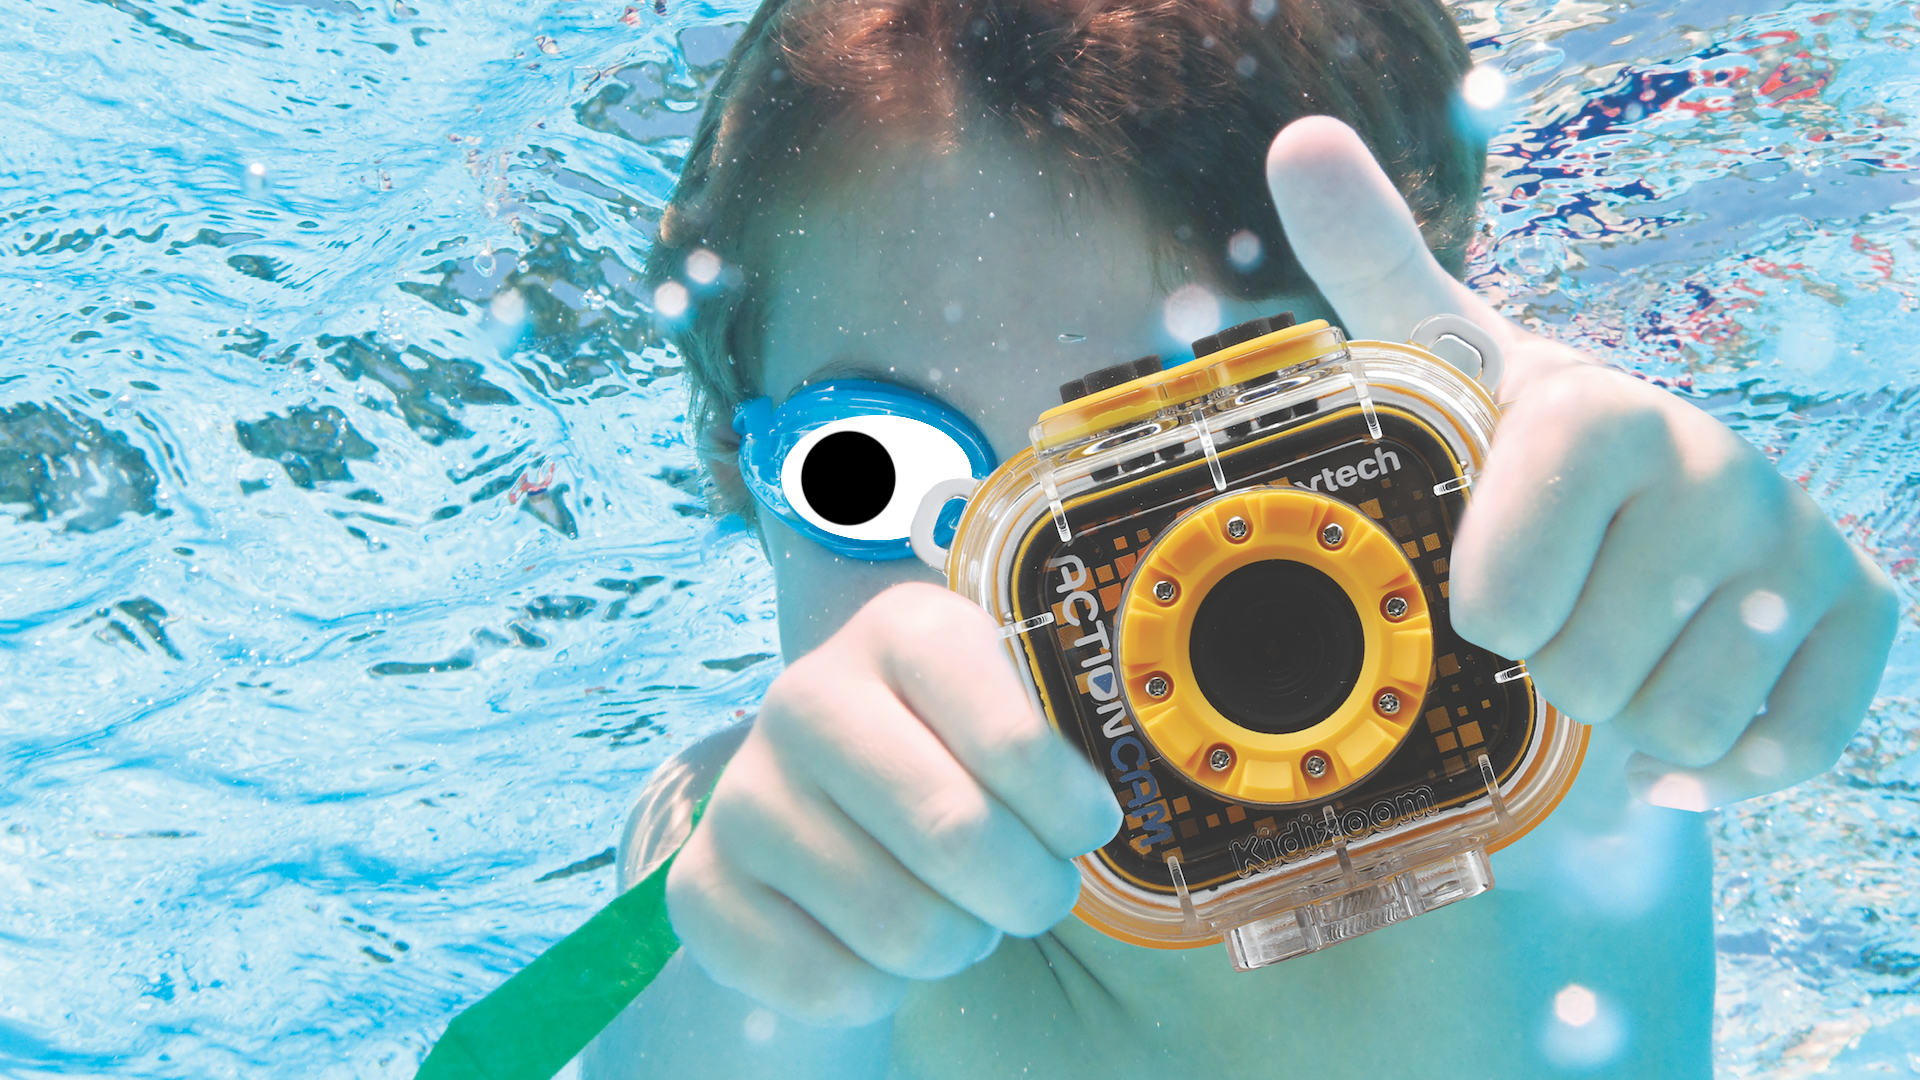 A close up of the VTech action cam underwater 